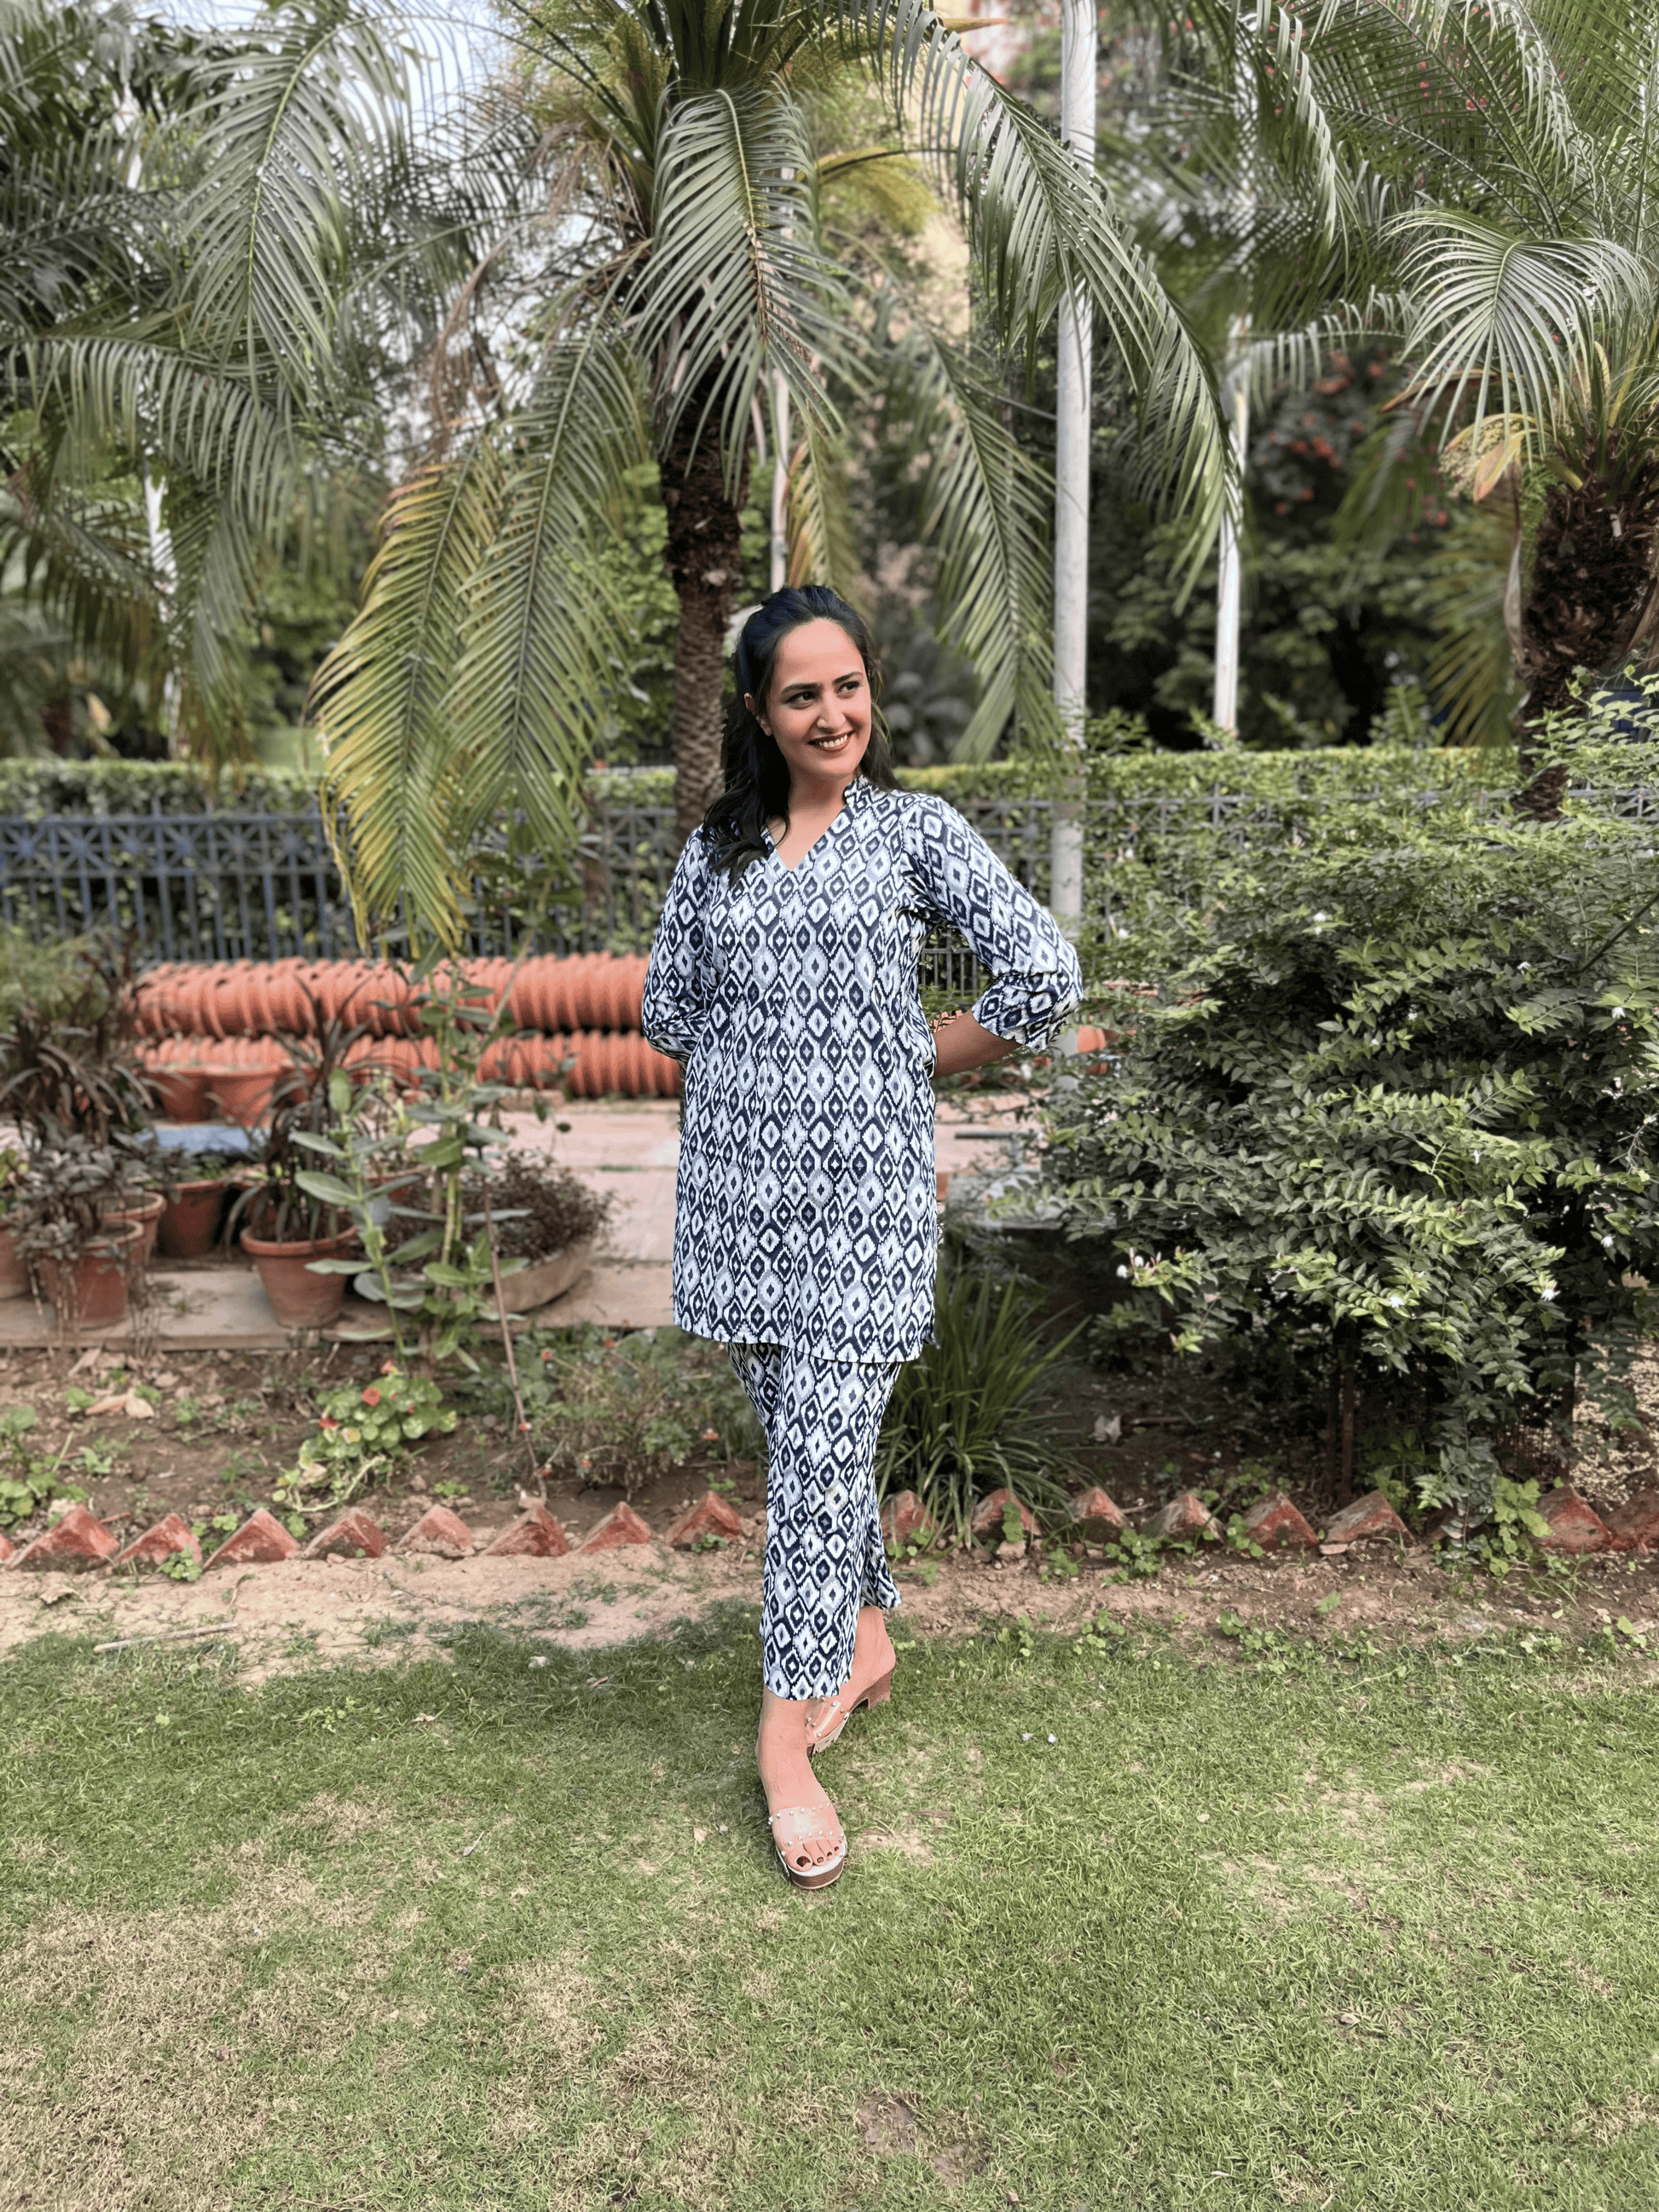 Blue Printed Top With Pant Set at Kamakhyaa by Kamakhyaa. This item is 100% pure cotton, Blue, Casual Wear, Co-ord Sets, KKYSS, Natural, Office, Office Wear Co-ords, Prints, Relaxed Fit, Summer Sutra, Womenswear